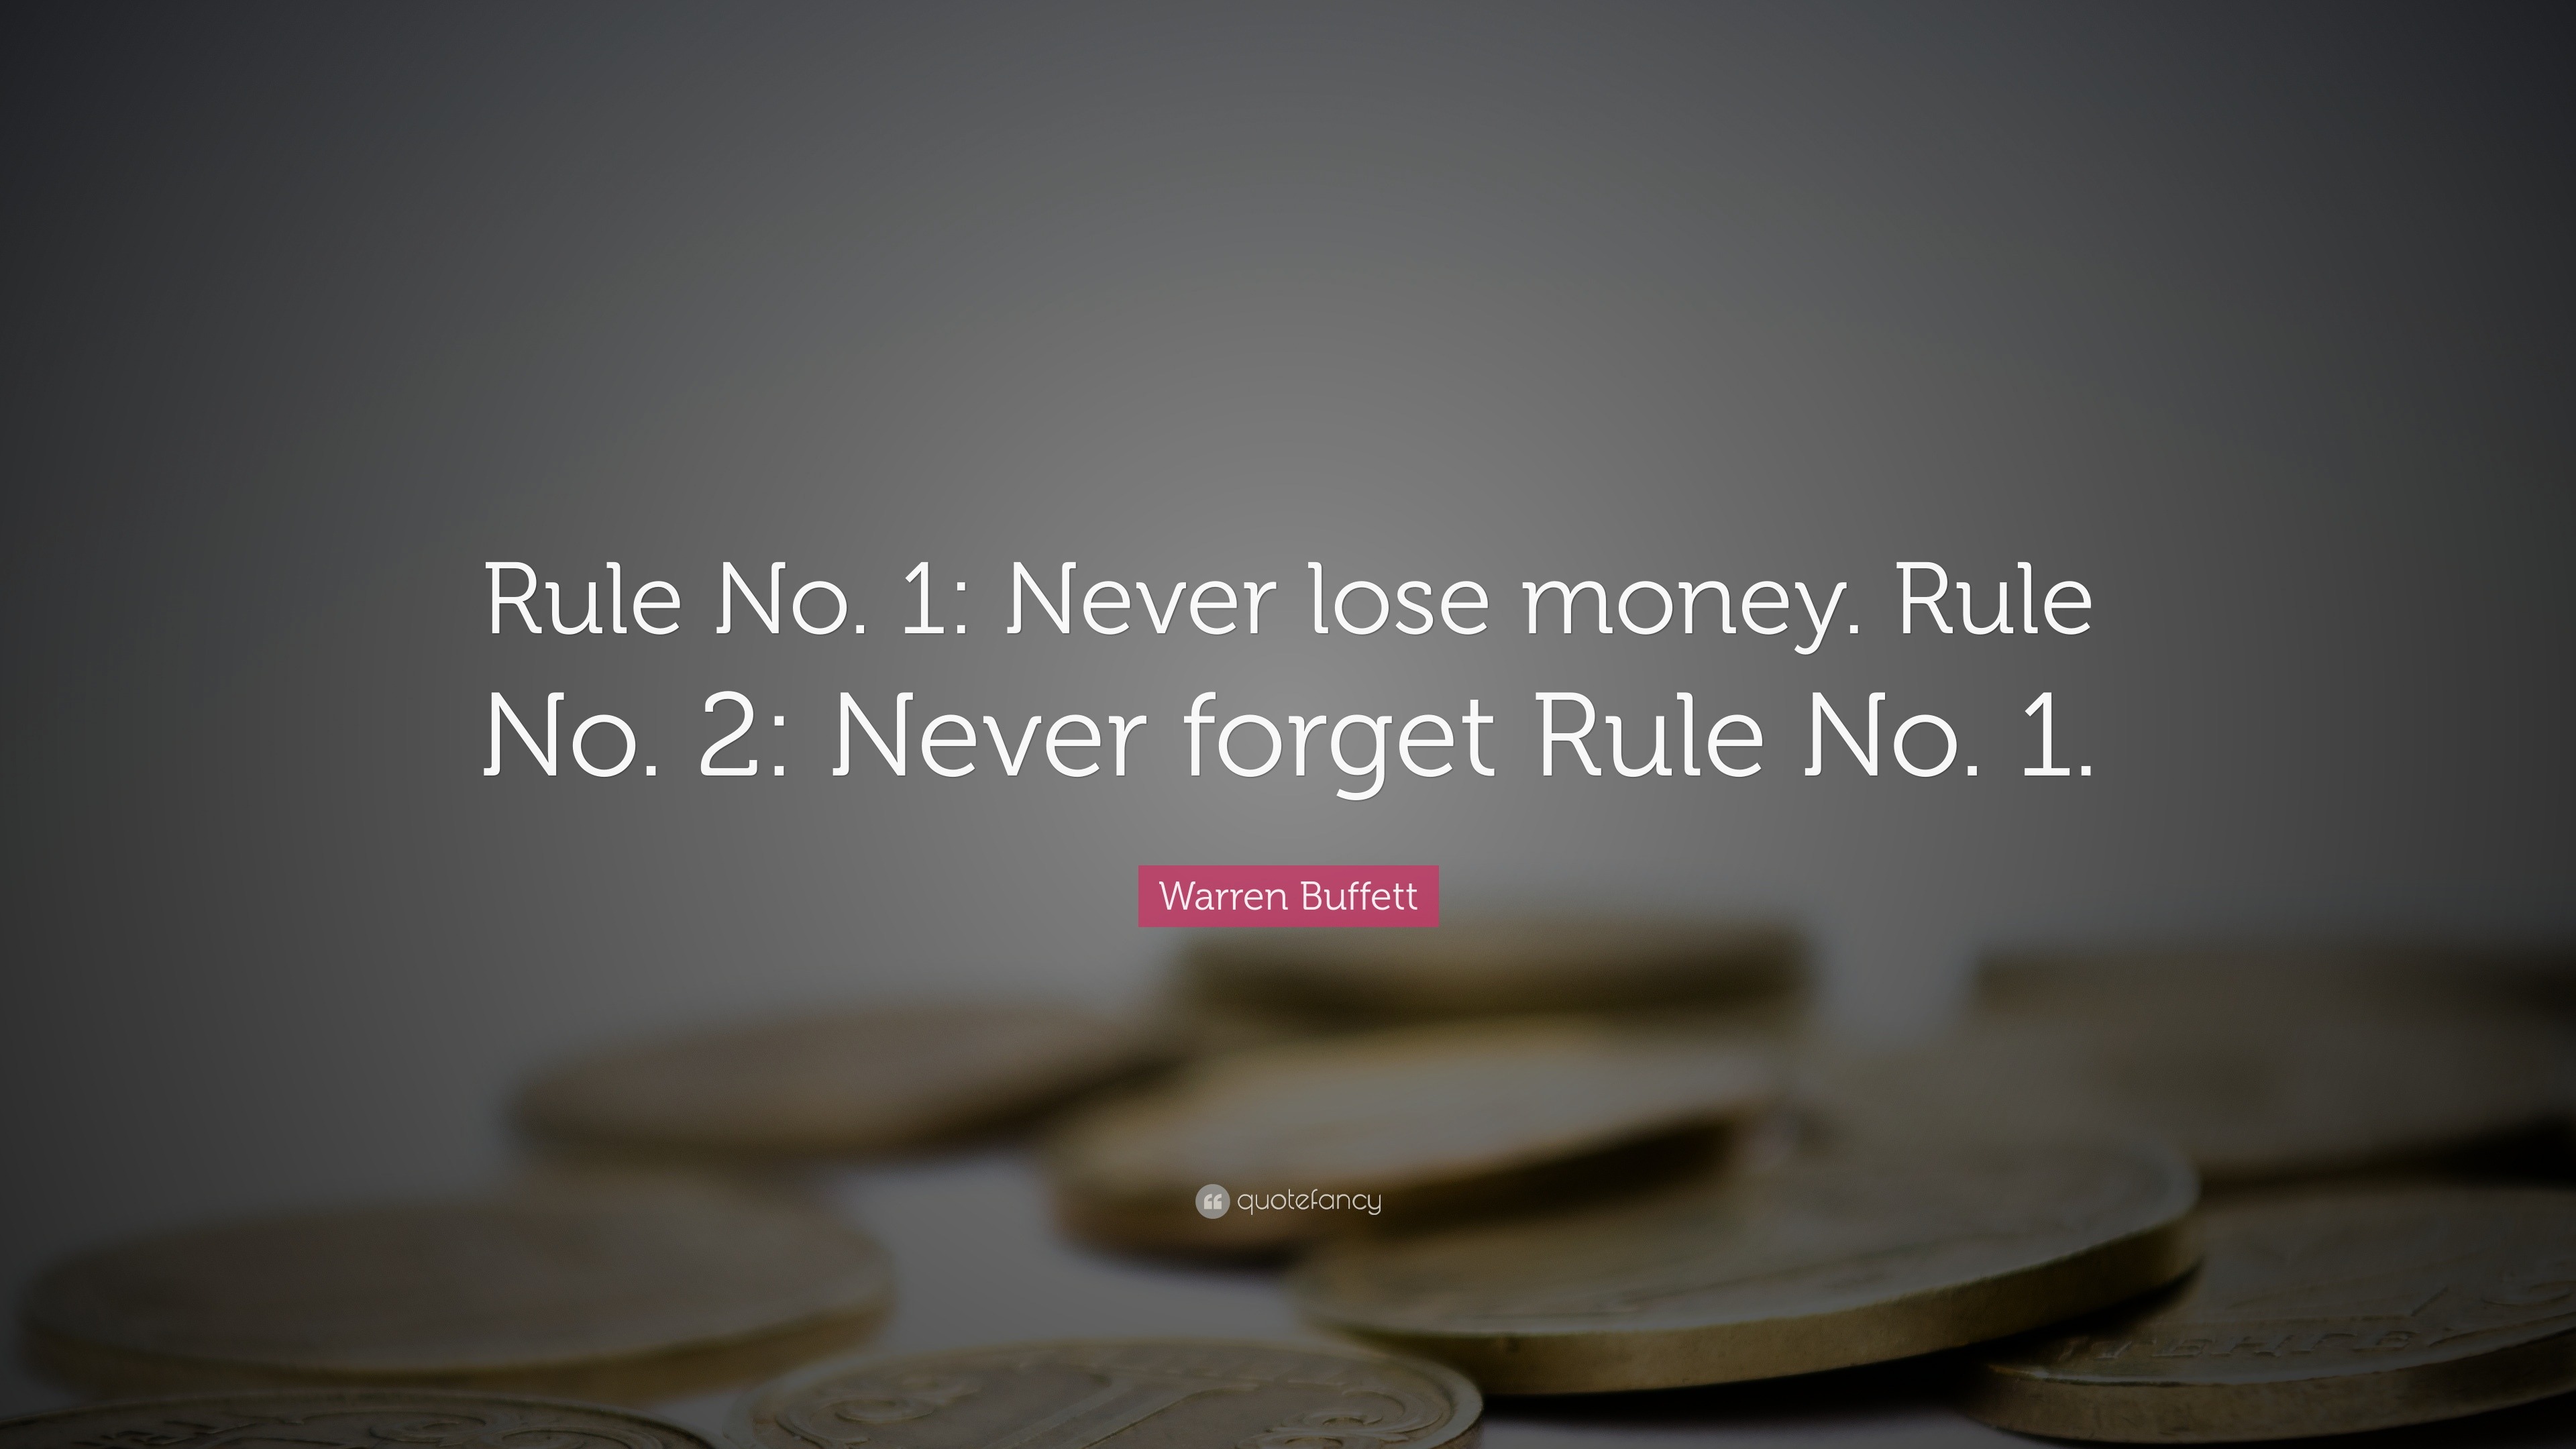 Warren Buffett Quote: “Rule No. 1: Never lose money. Rule No. 2: Never  forget Rule No.